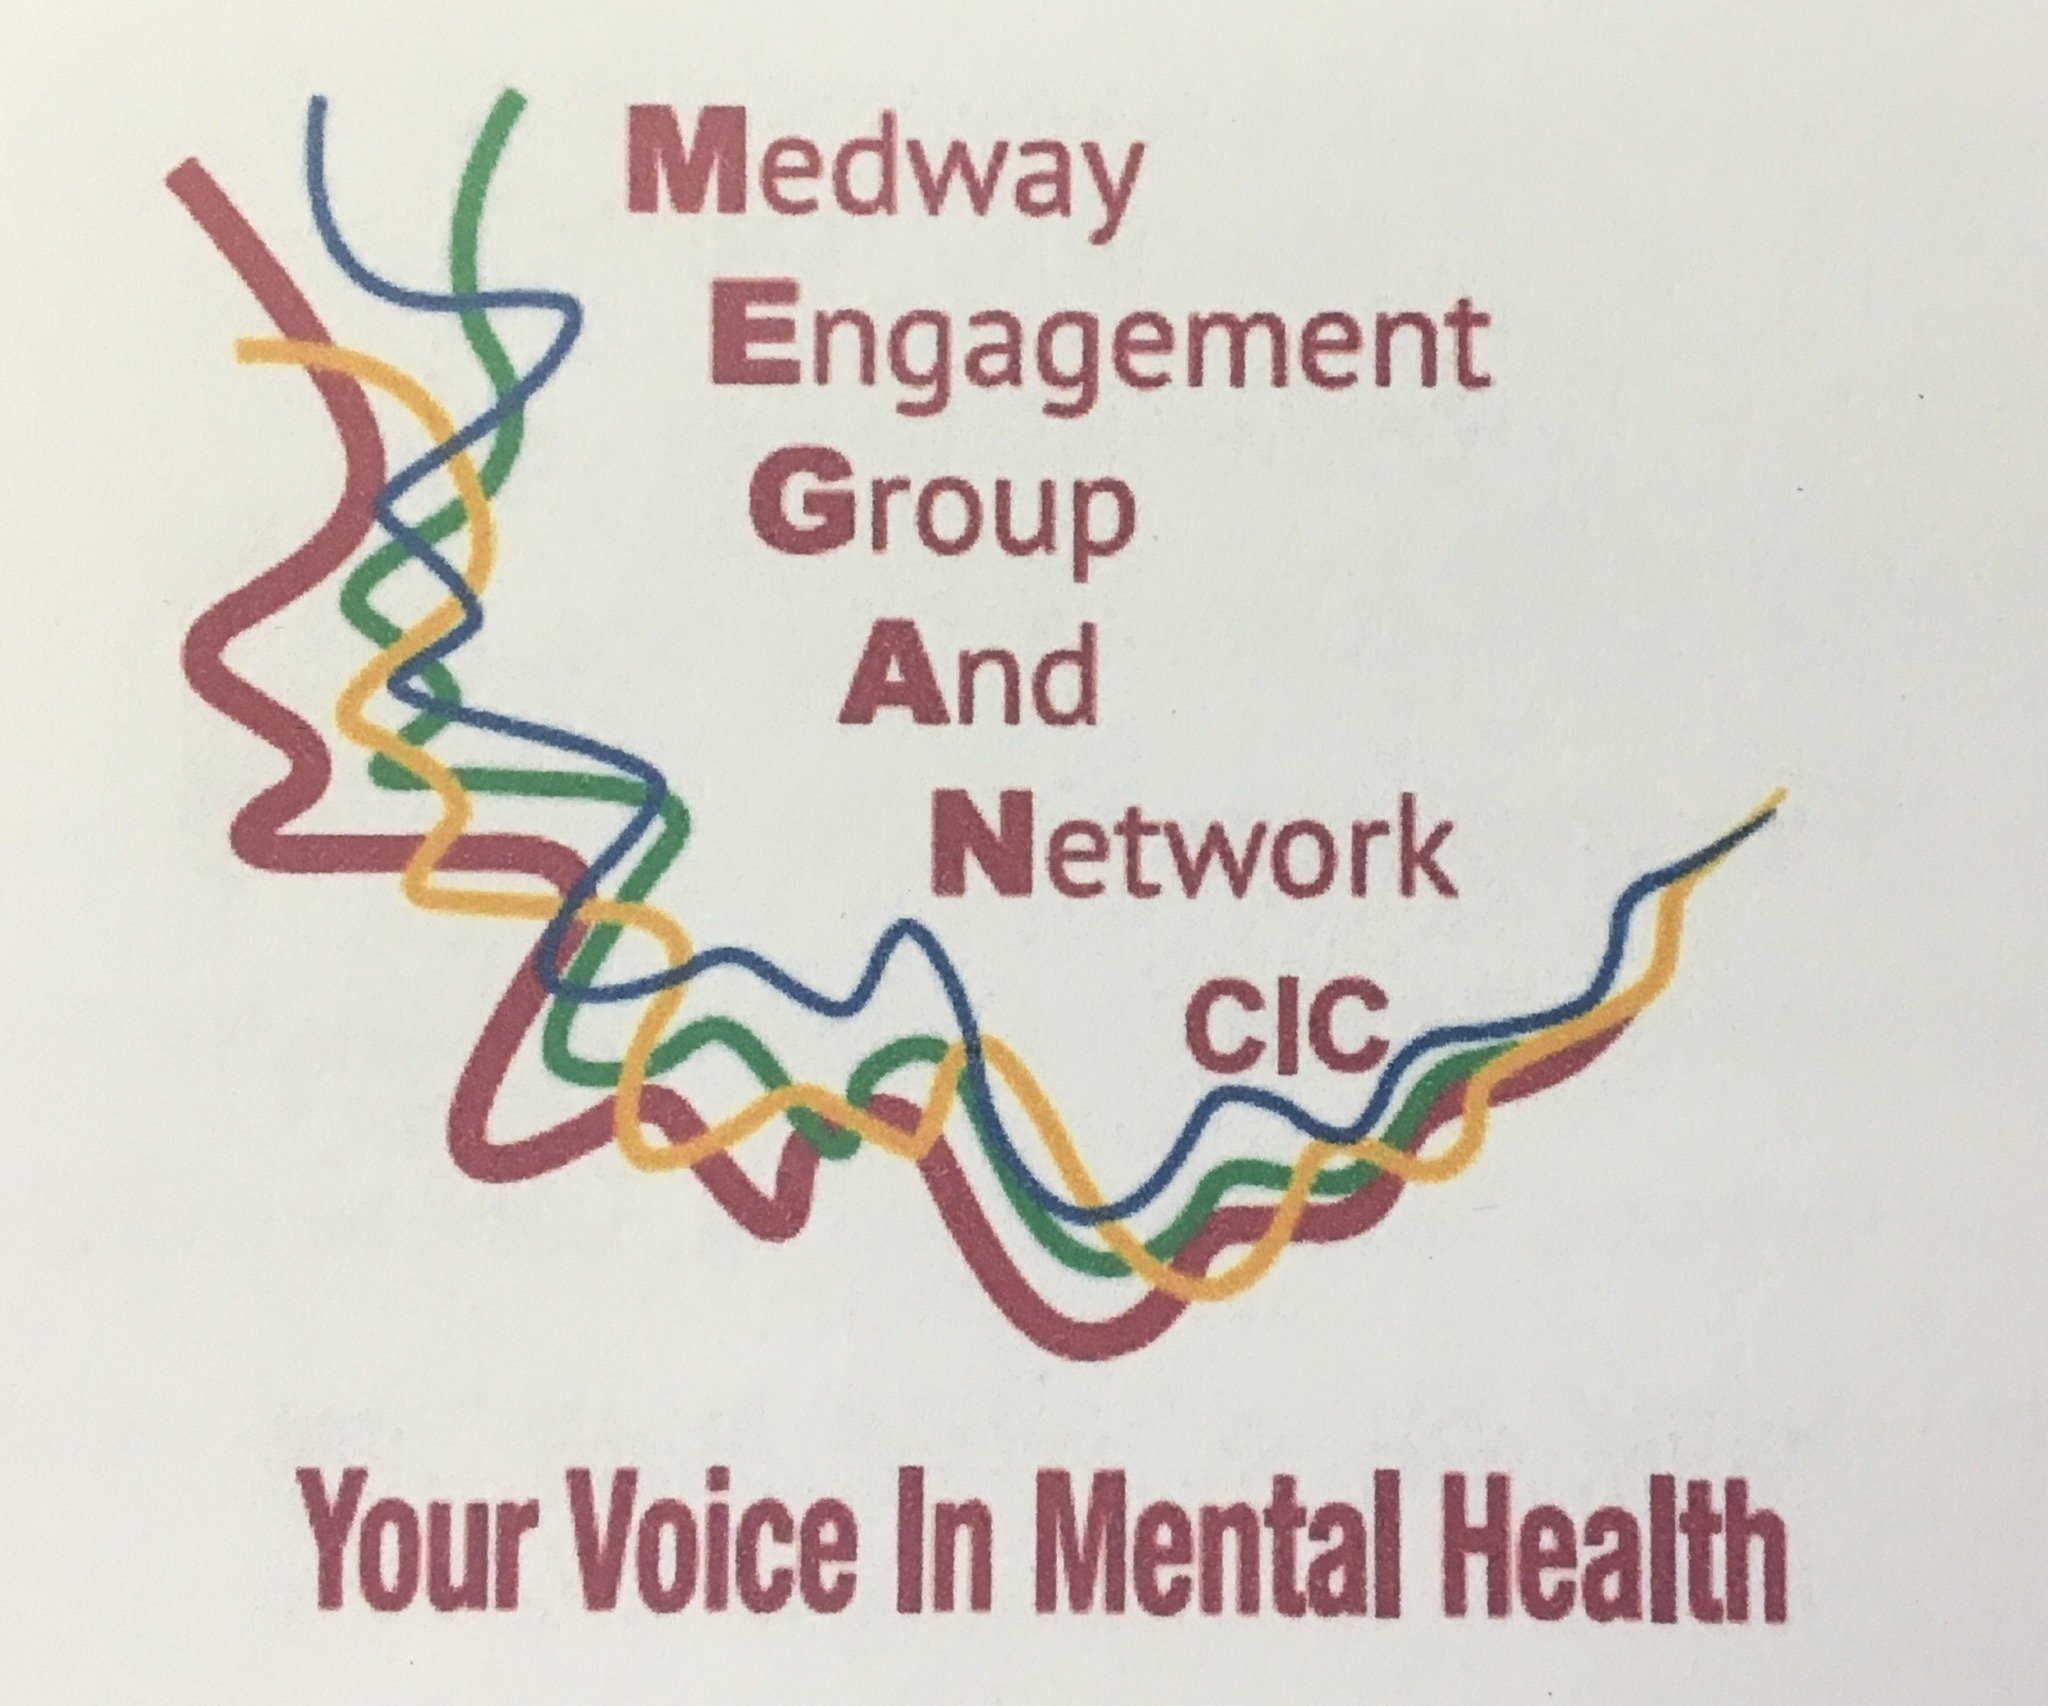 MEGAN CIC is a not for profit organisation that has been supporting individuals experiencing mental health issues across Medway, Swale & DGS since August 2009.